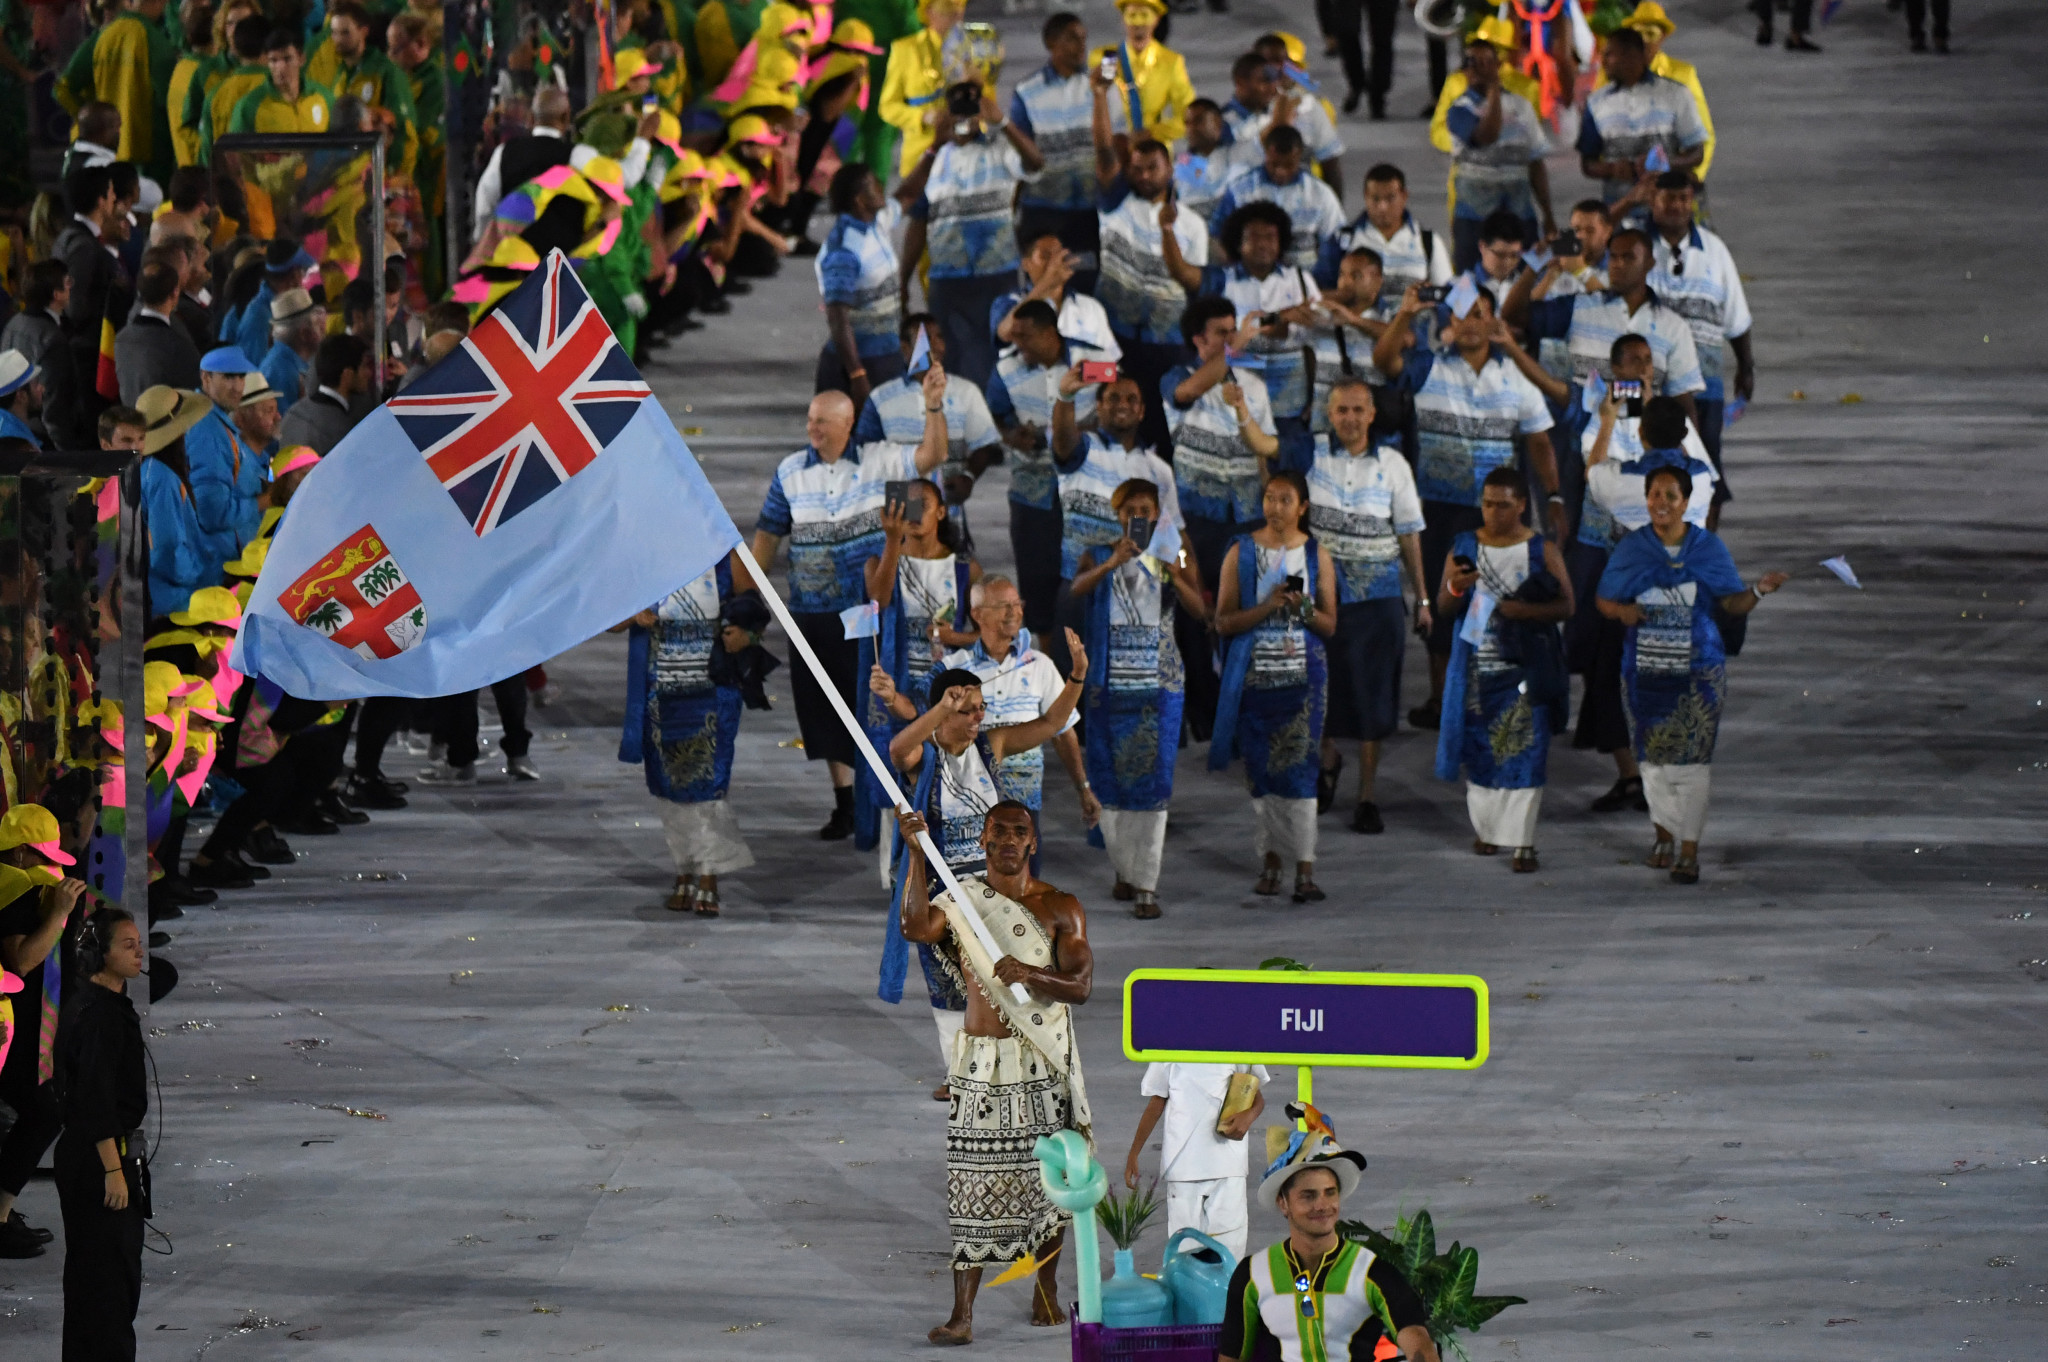 The partnership aims to support the Fijian delegation to Tokyo 2020 ©Getty Images